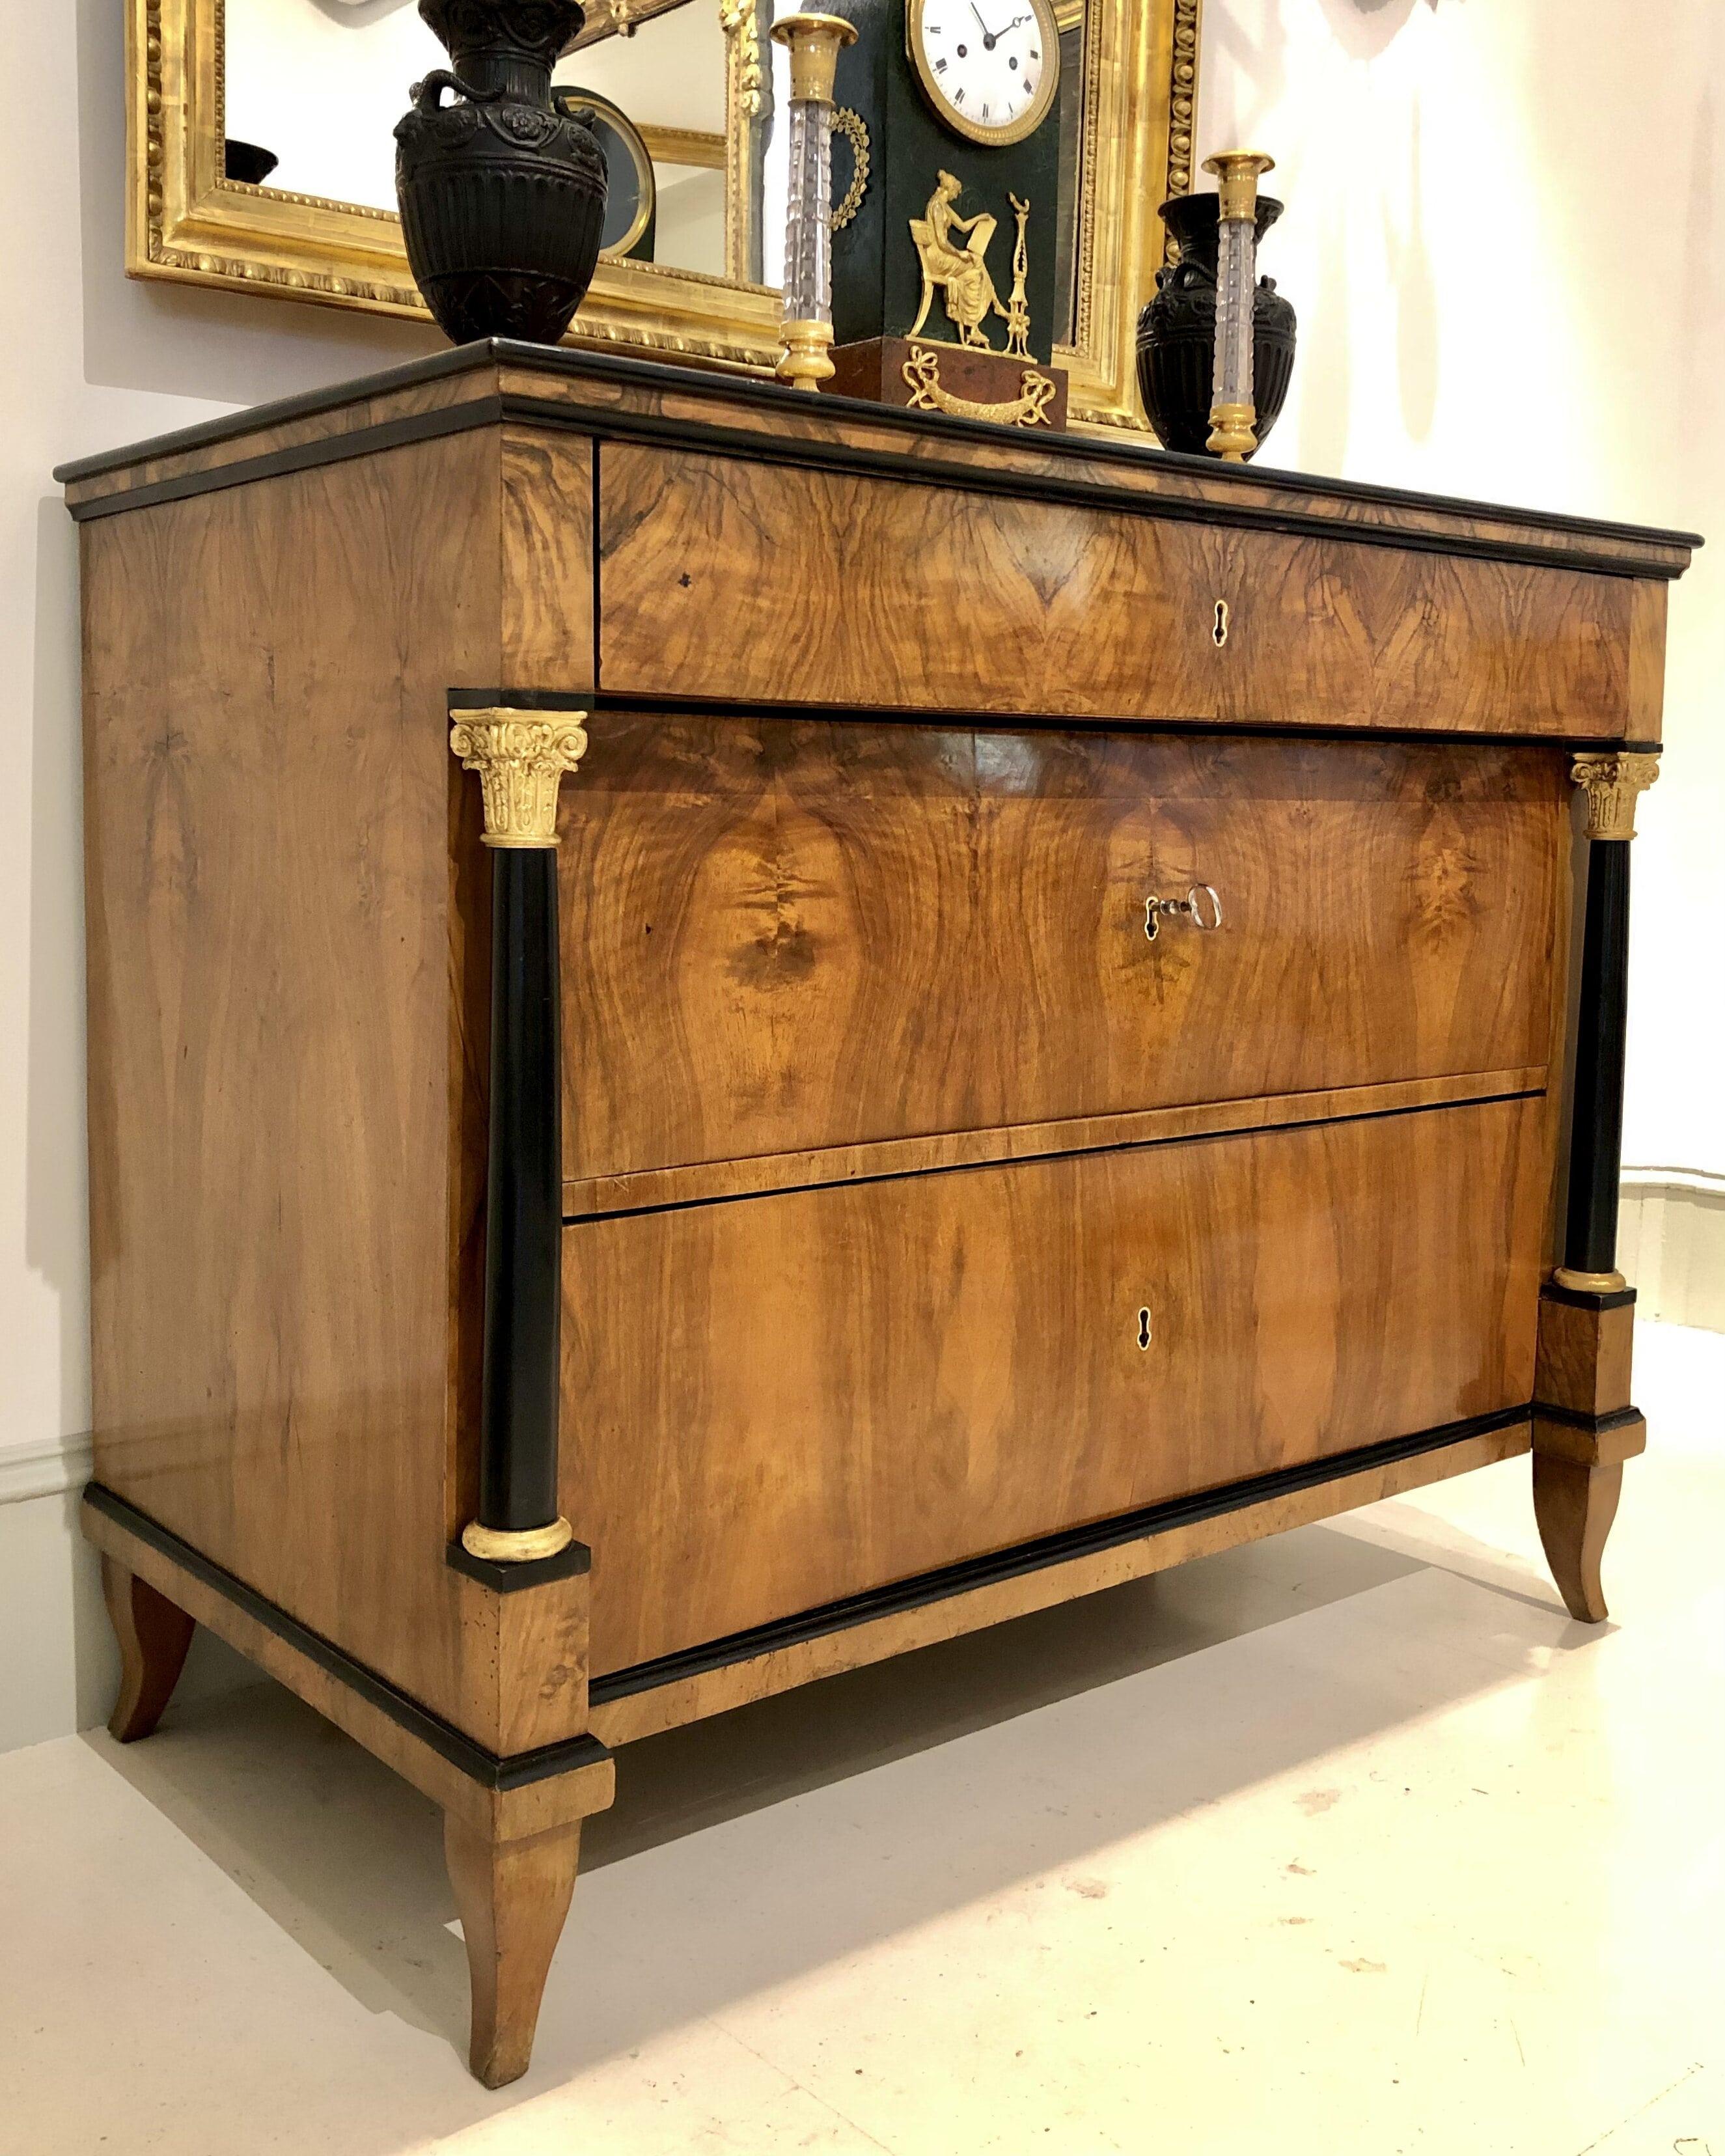 Elegant 19th century Austrian Biedermeier commode in walnut, with bone keyholes, ebonized columns and carved and gilded capitals. Standing on four delicate pointed feet, this Biedermeier commode features three drawers with their original